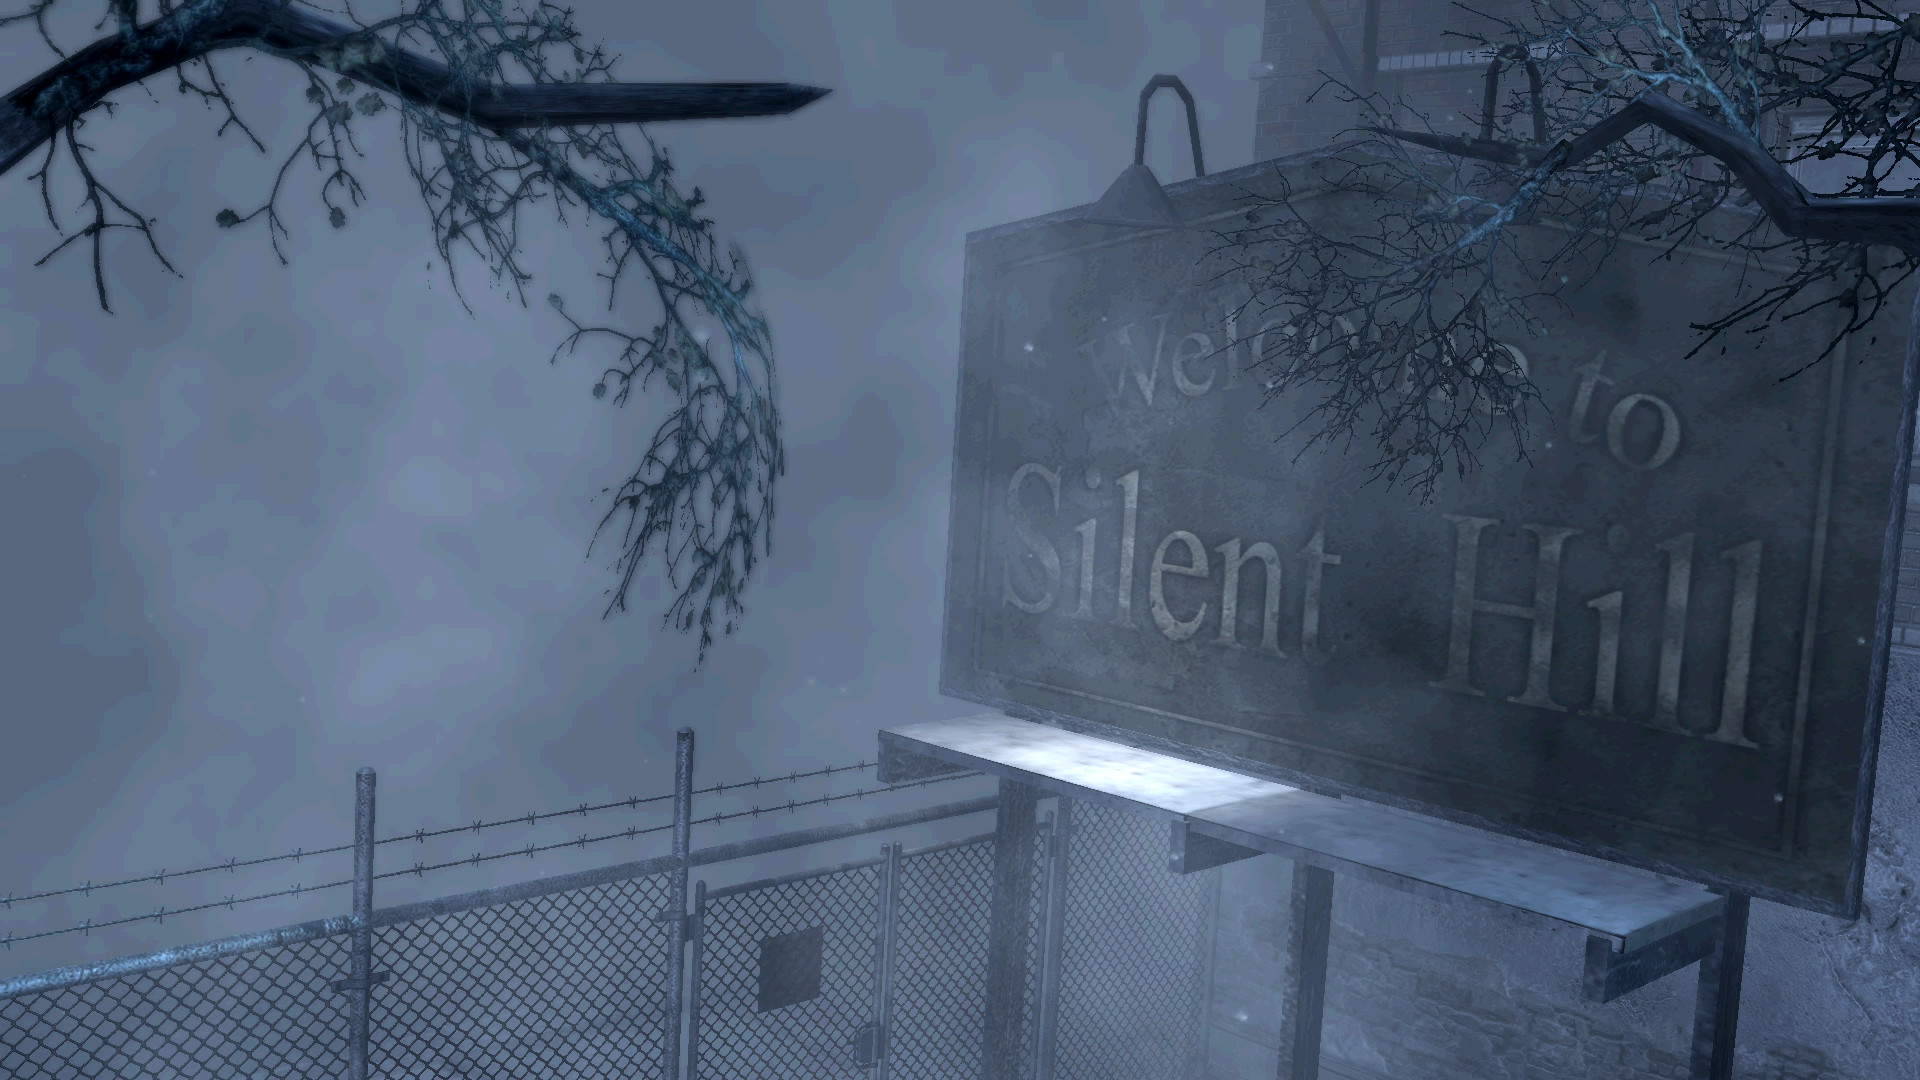 silent hill 1 pc game free download